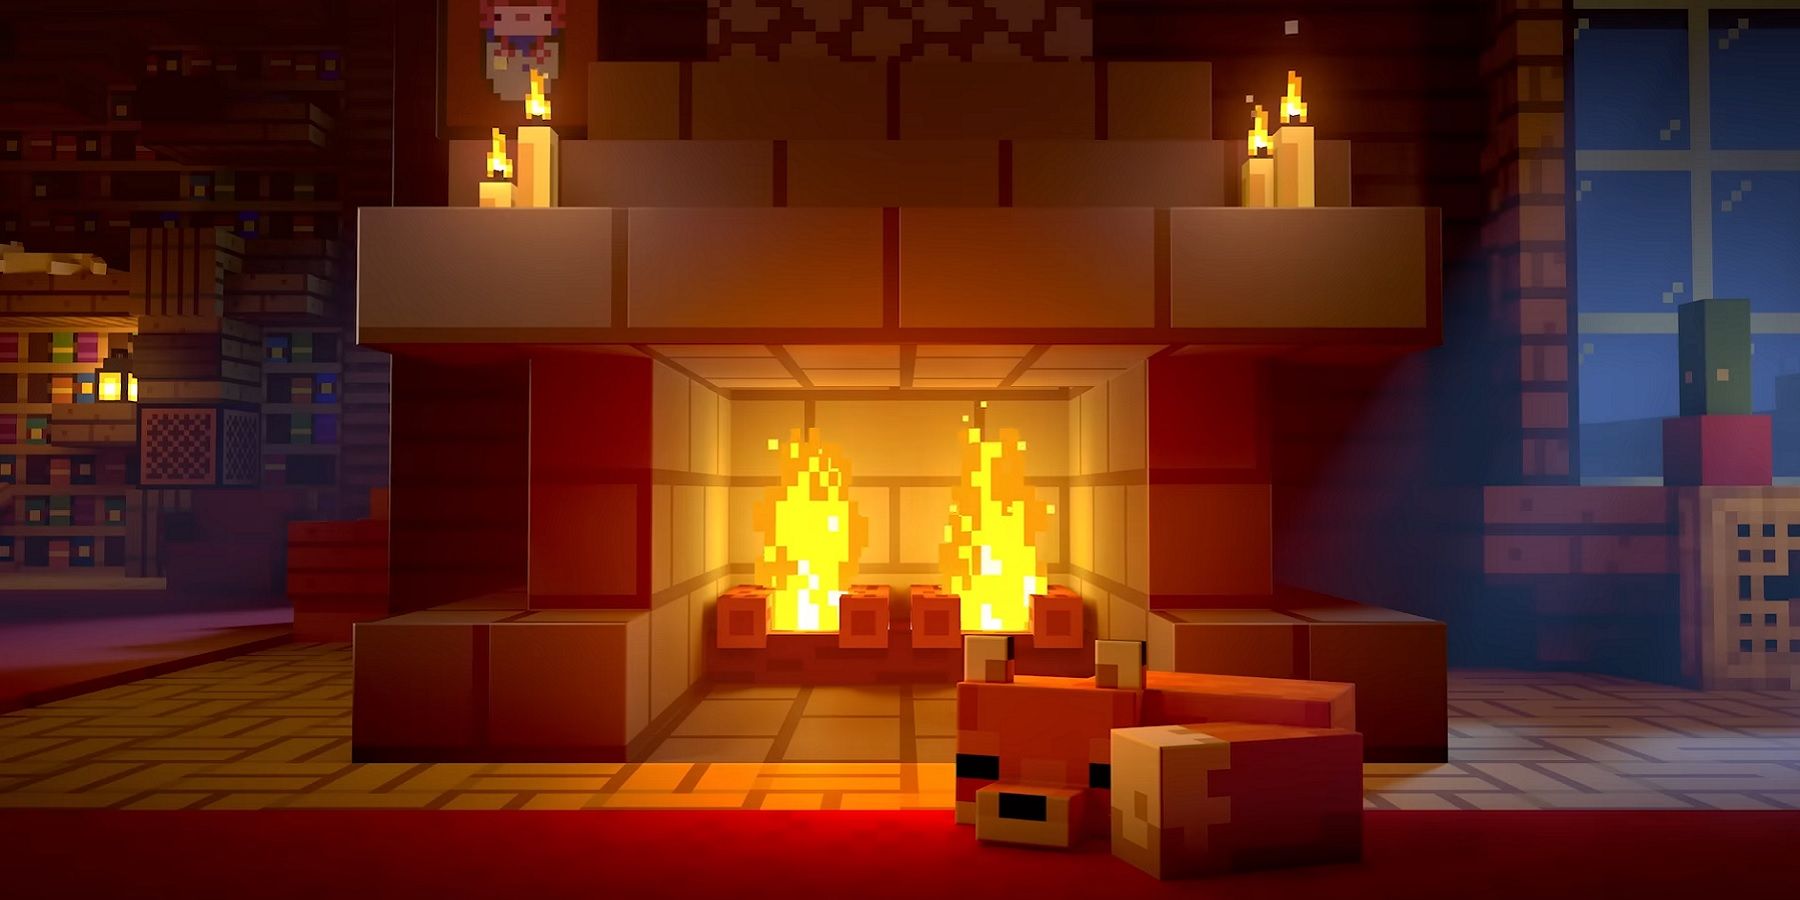 Image from Minecraft showing a sleeping fox lying in front of a cozy fireplace.